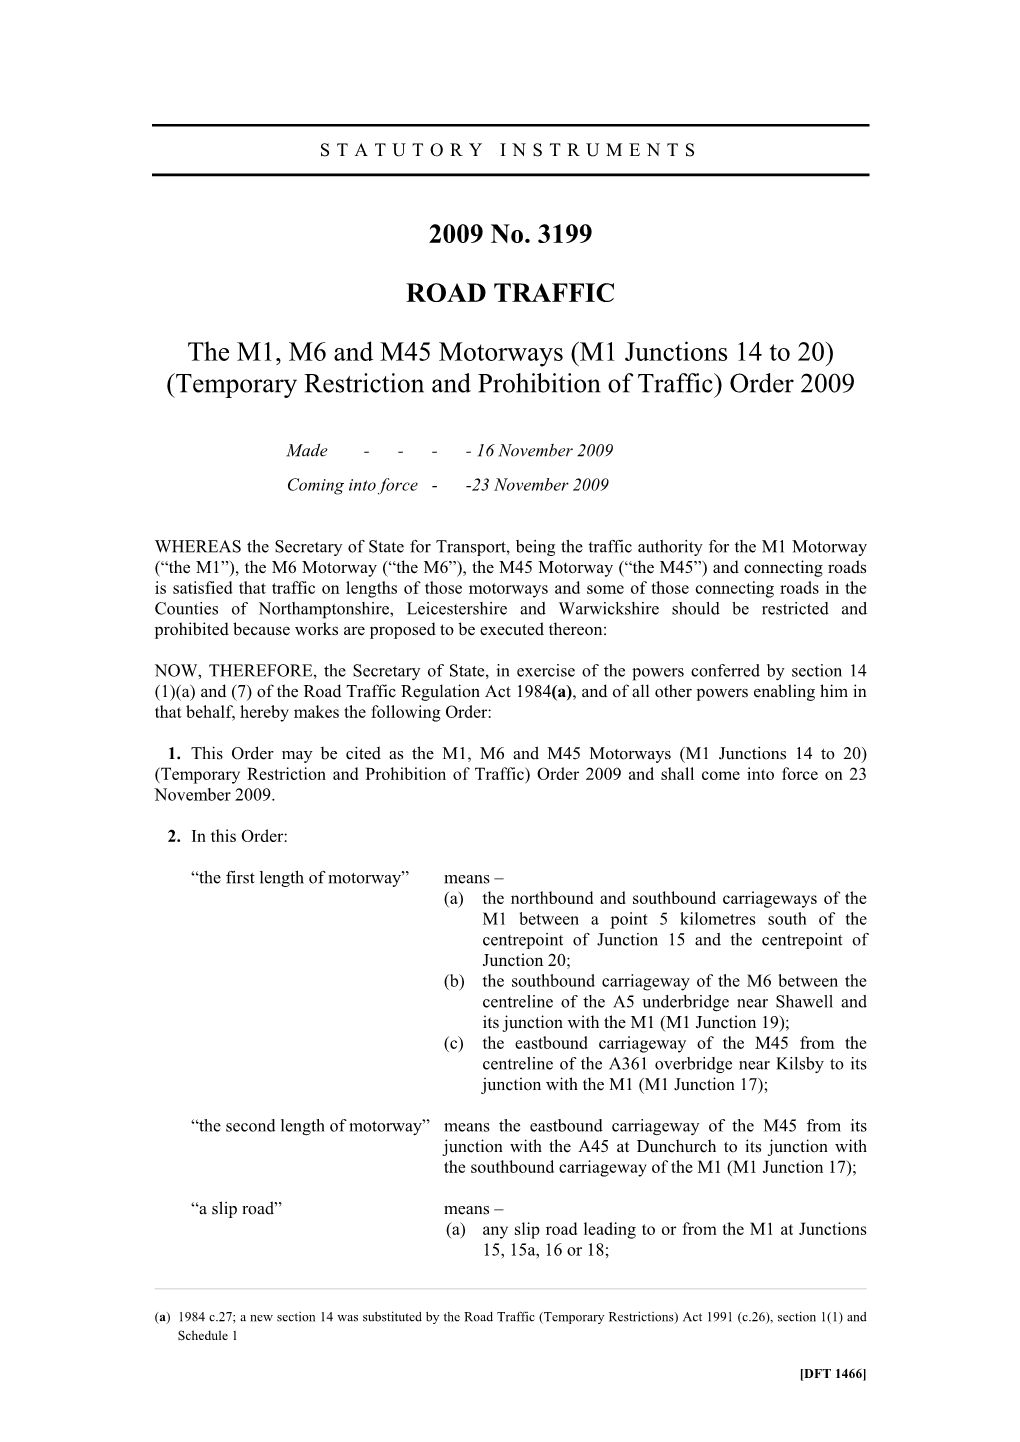 The M1, M6 and M45 Motorways (M1 Junctions 14 to 20) (Temporary Restriction and Prohibition of Traffic) Order 2009